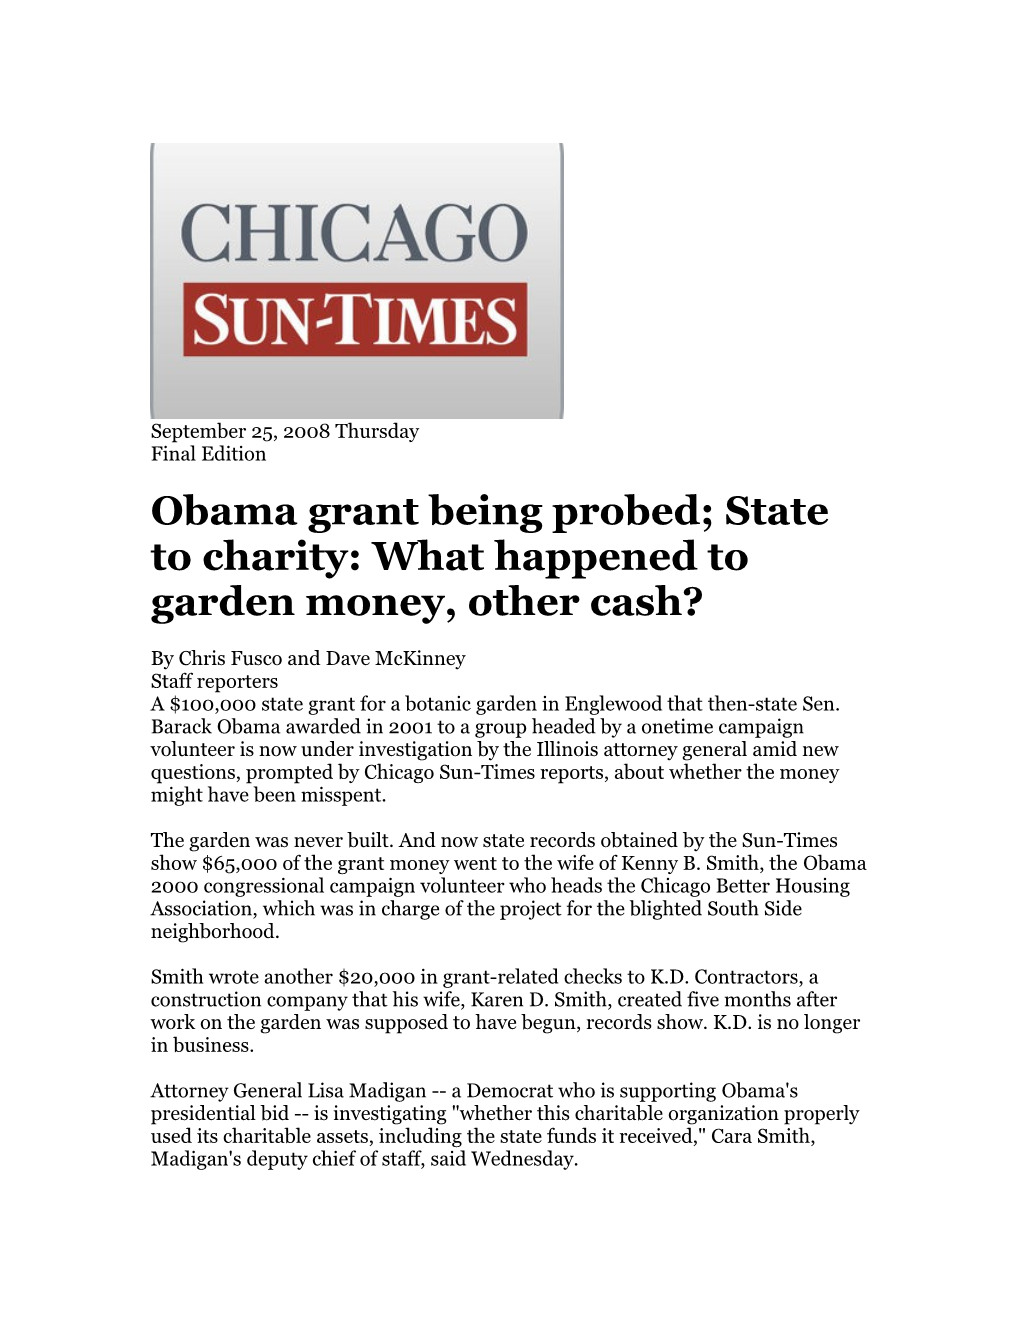 Obama Grant Being Probed; State to Charity: What Happened to Garden Money, Other Cash?